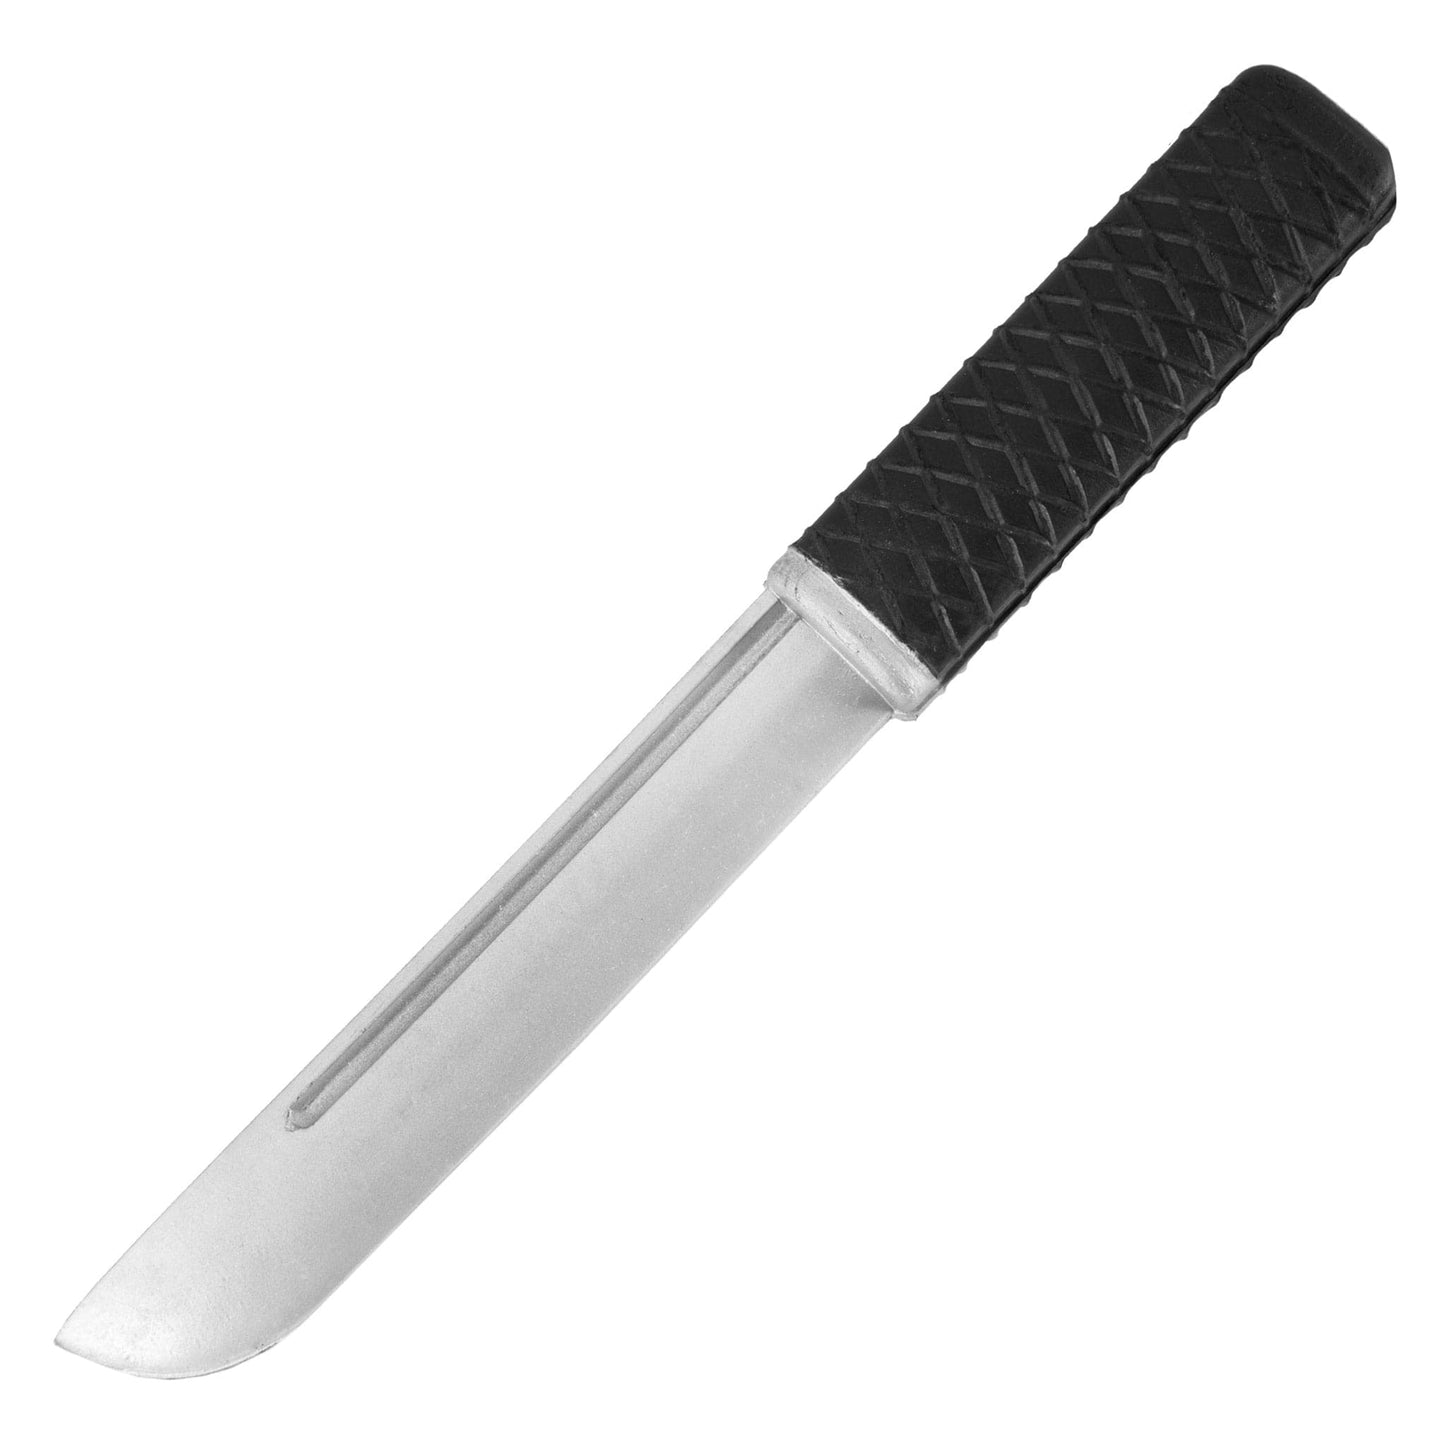 Eclipse Martial Art Supplies sporting goods 9.5 inch Rubber Training Knife